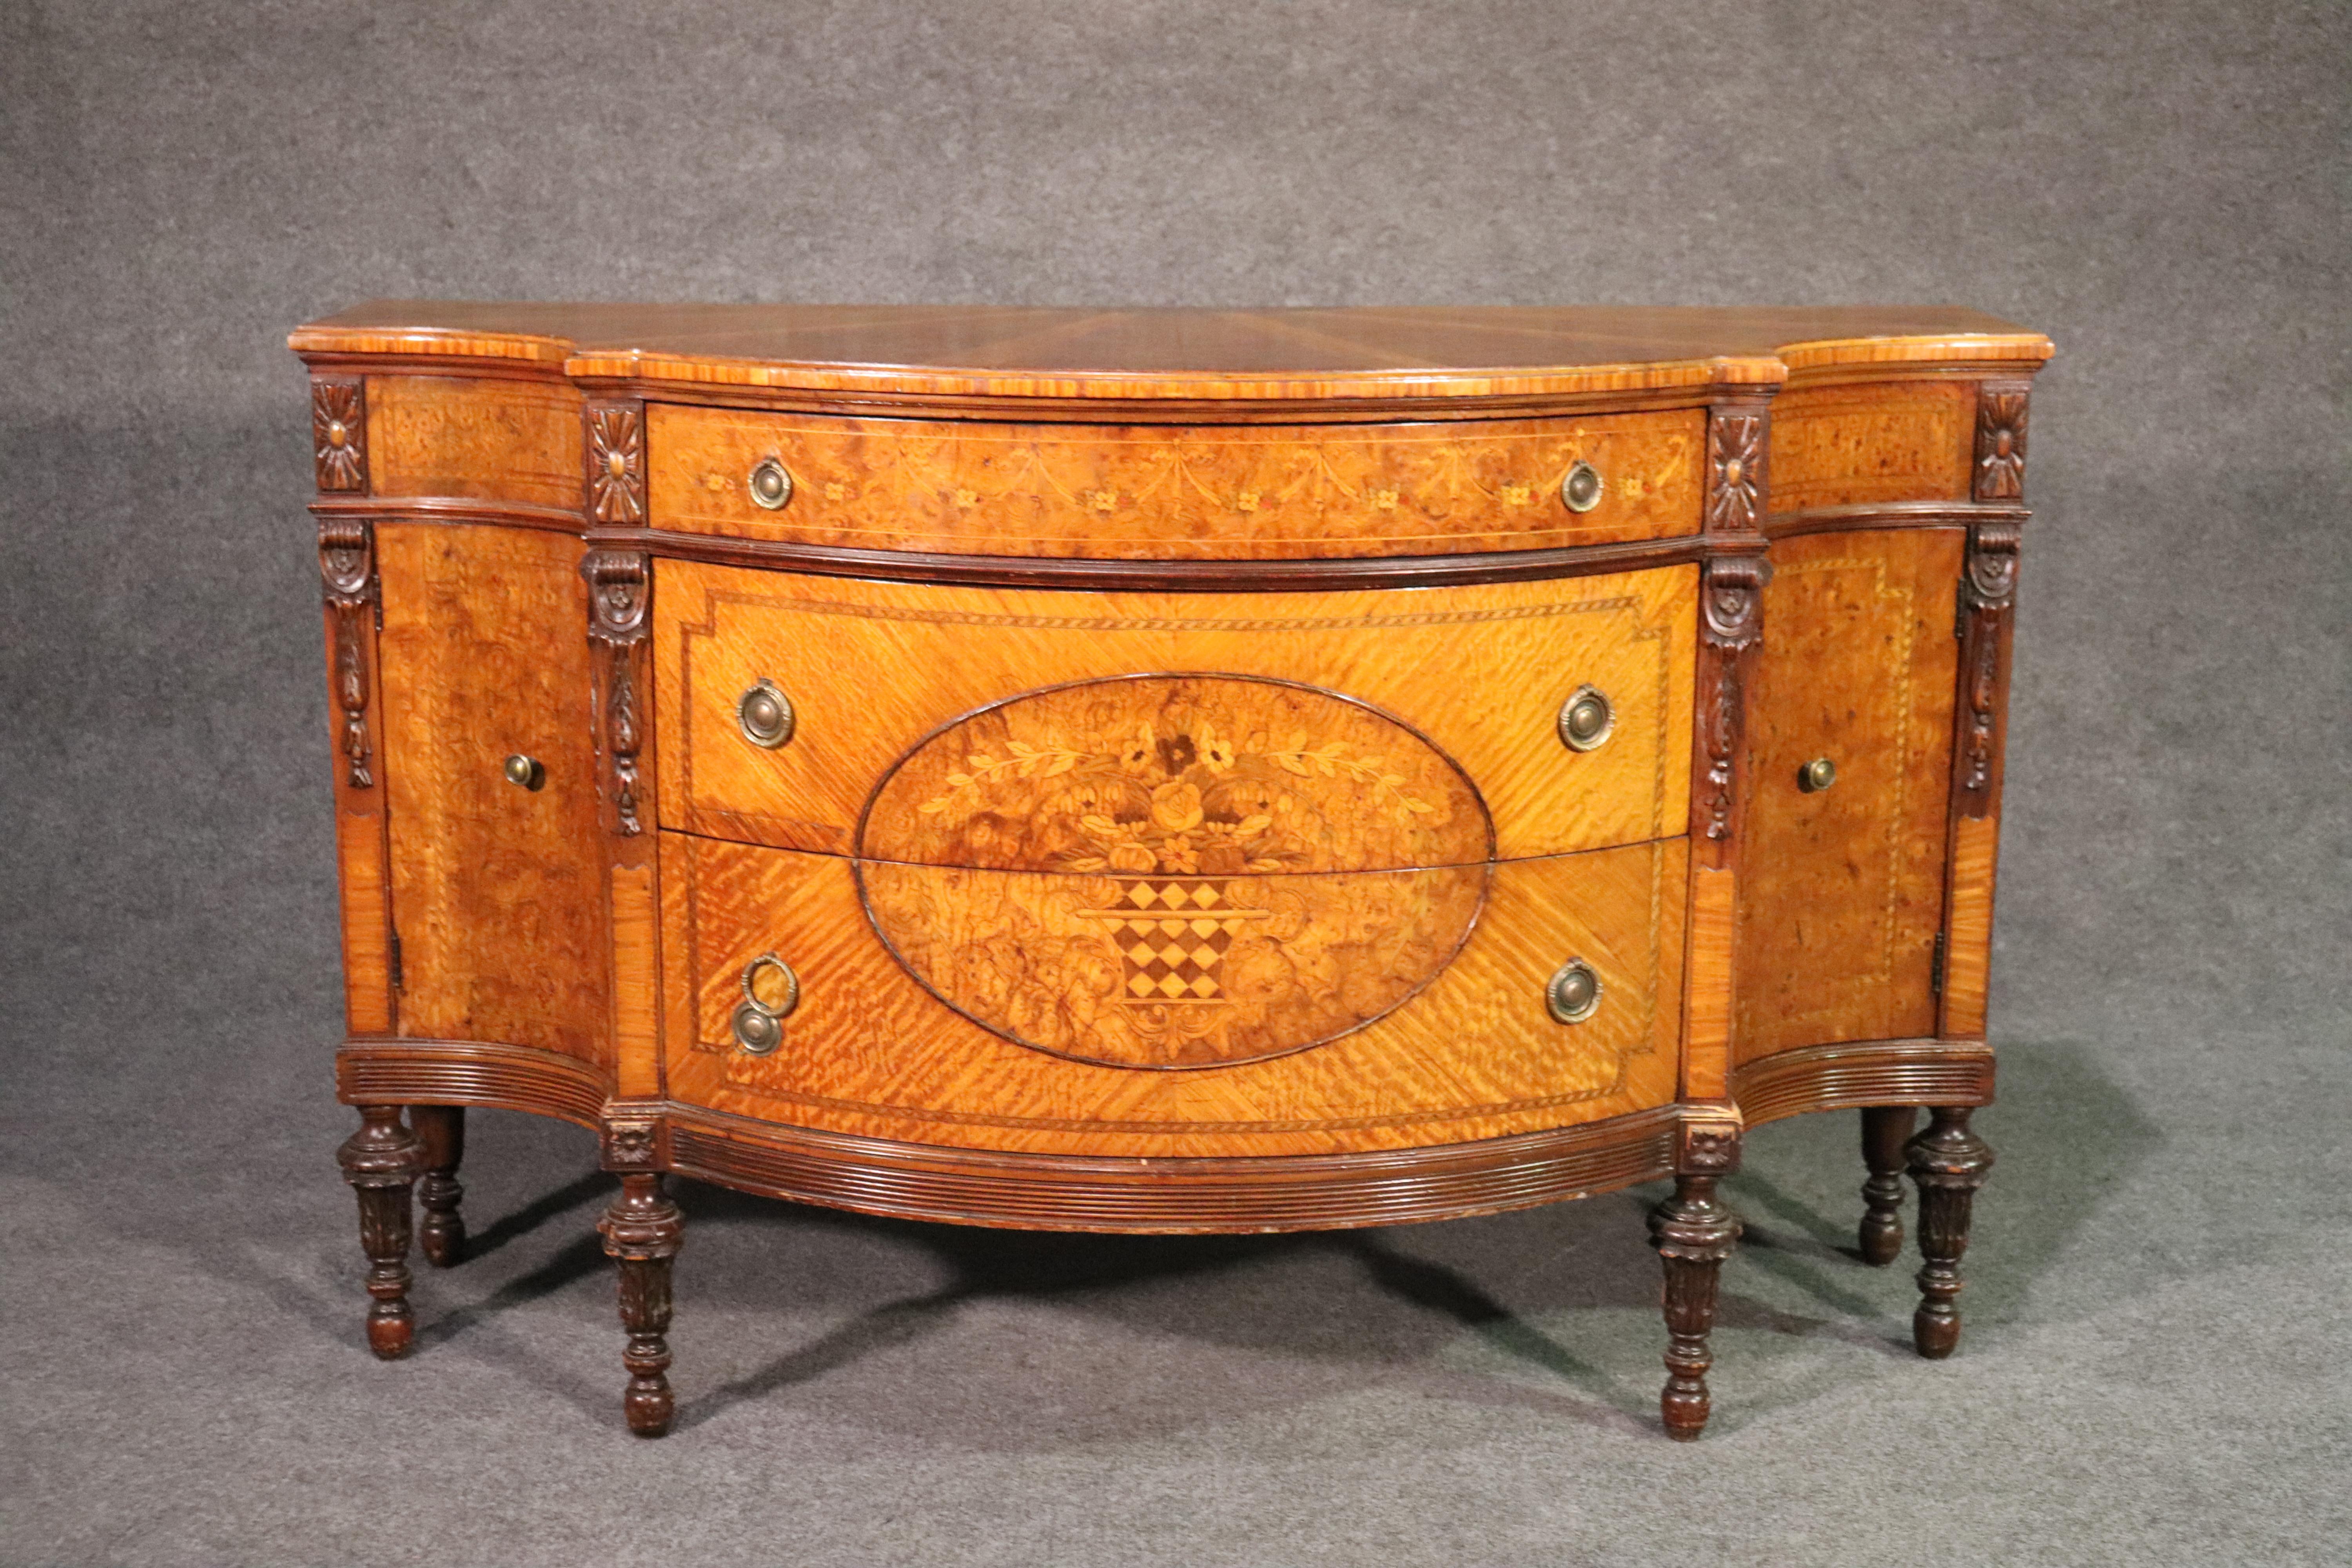 This is a rather spectacular piece of furniture with breathtaking inlay of burled amboyna, olive and boxwood in a satinwood case. The case is absolutely stunning and you won't see another one of these anytime soon. The condition is also very good.